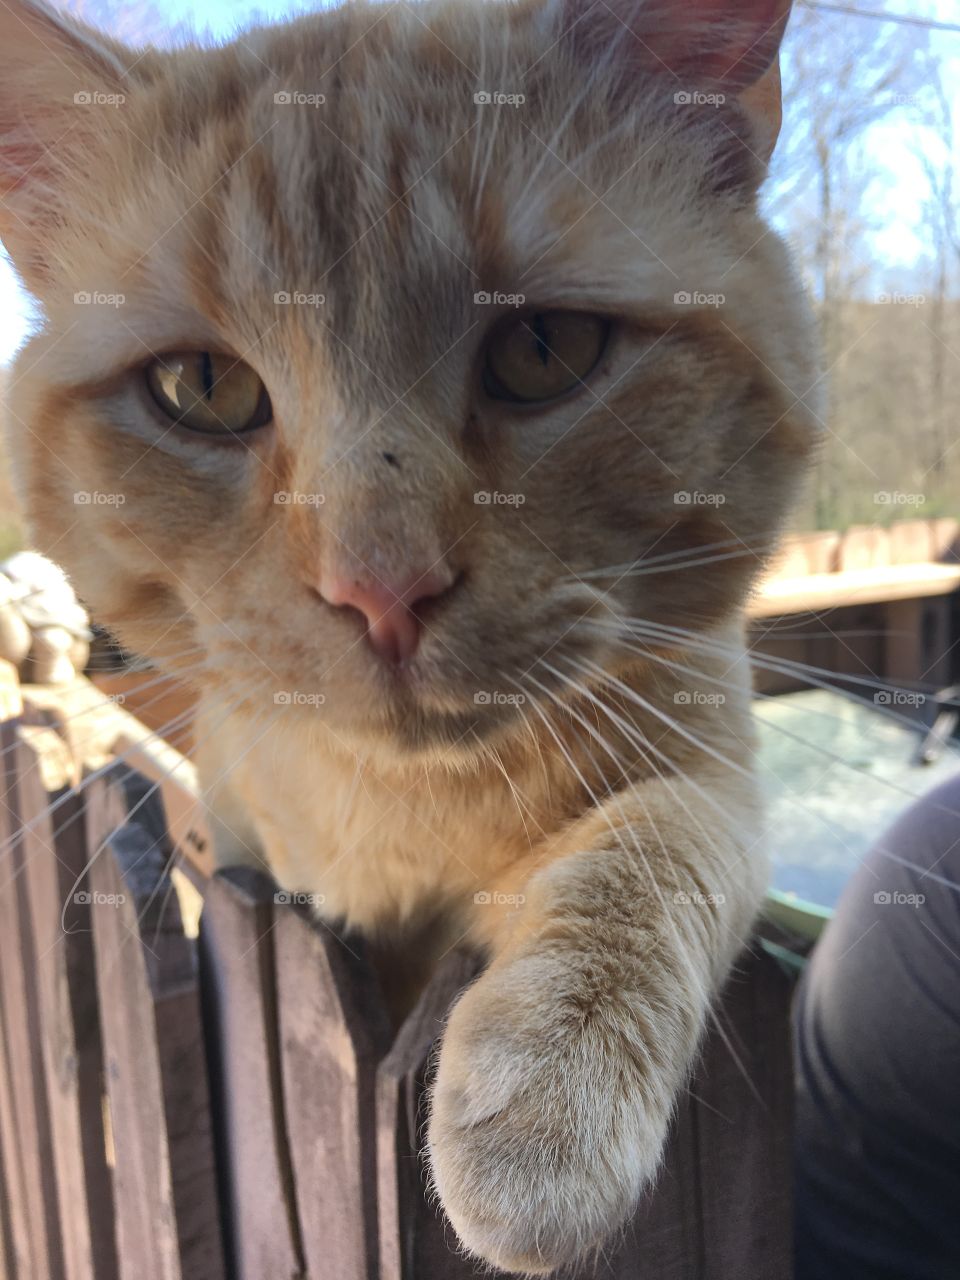 My orange cat who we adopted as a kitten when he was left by his family in the woods. 